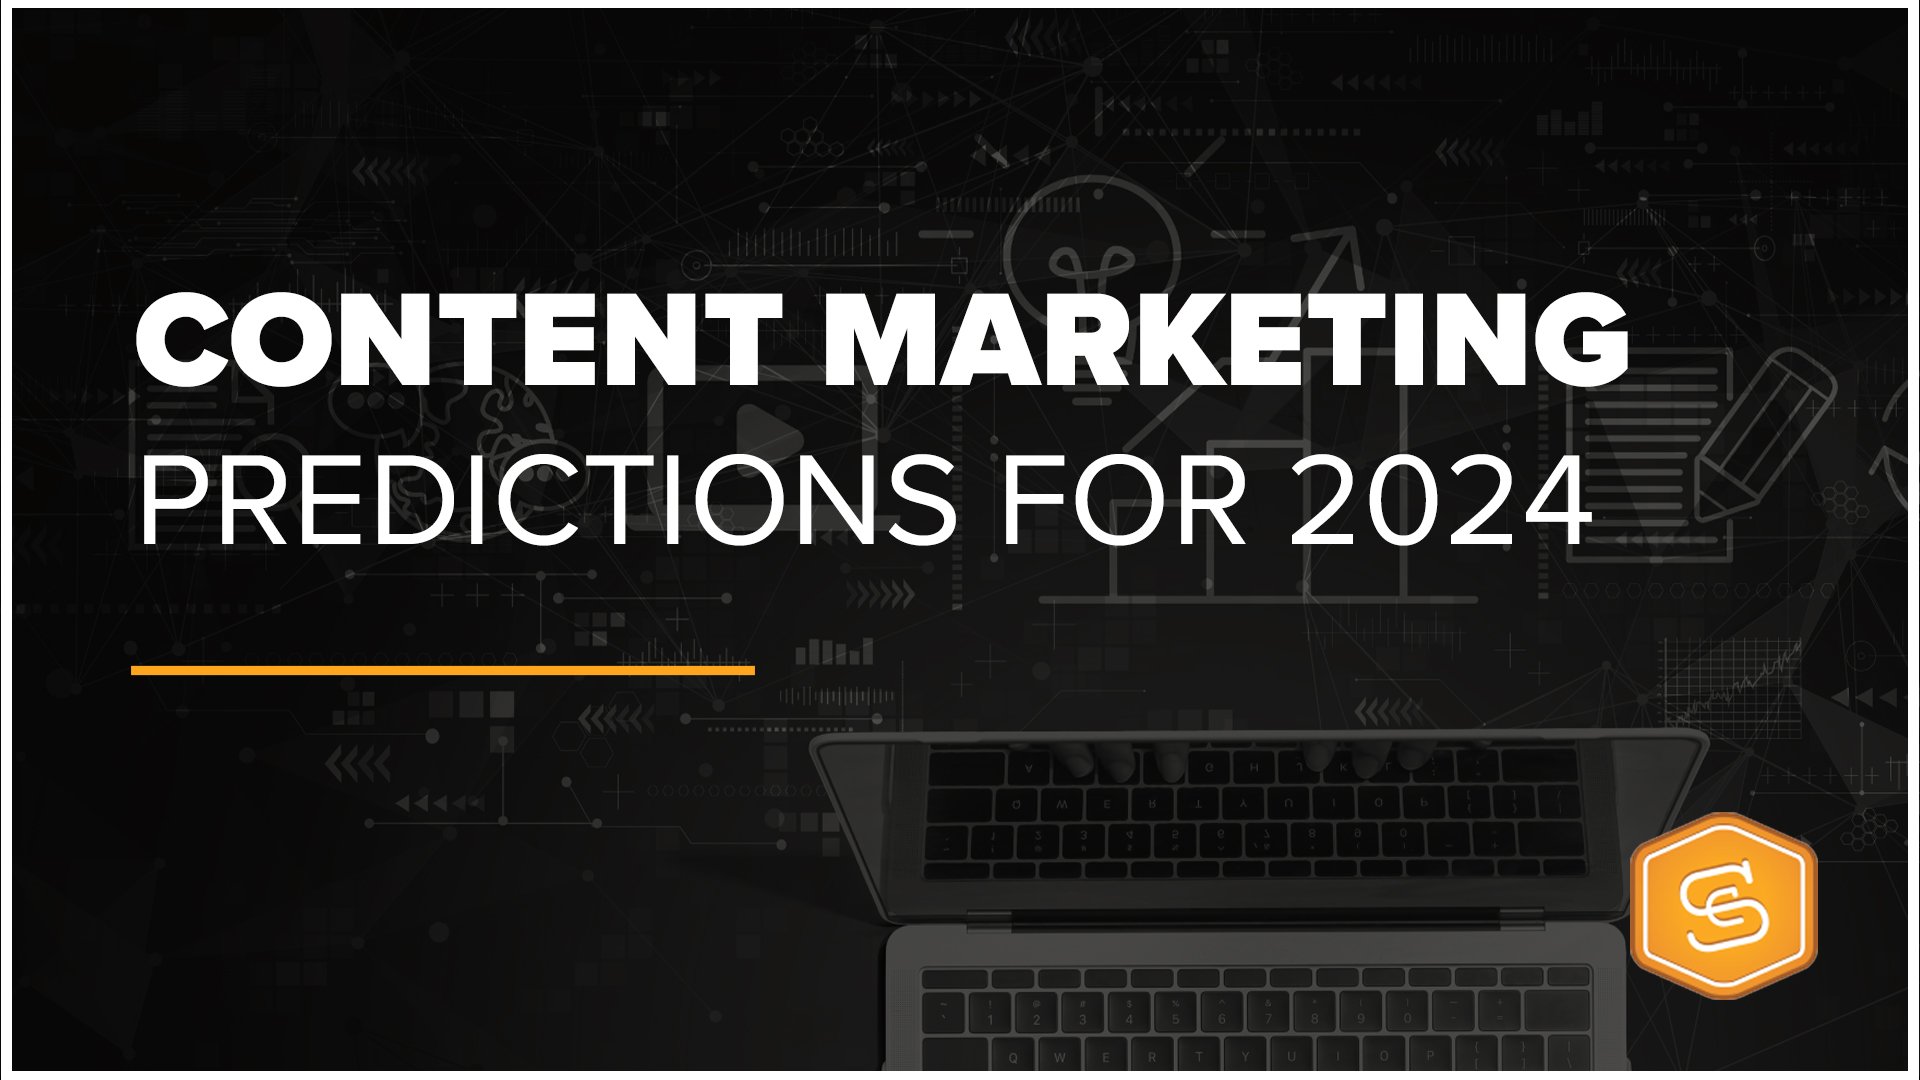 A black square with faded while line drawings in the background with the works Content Marketing Predictions for 2024 in large white font. 